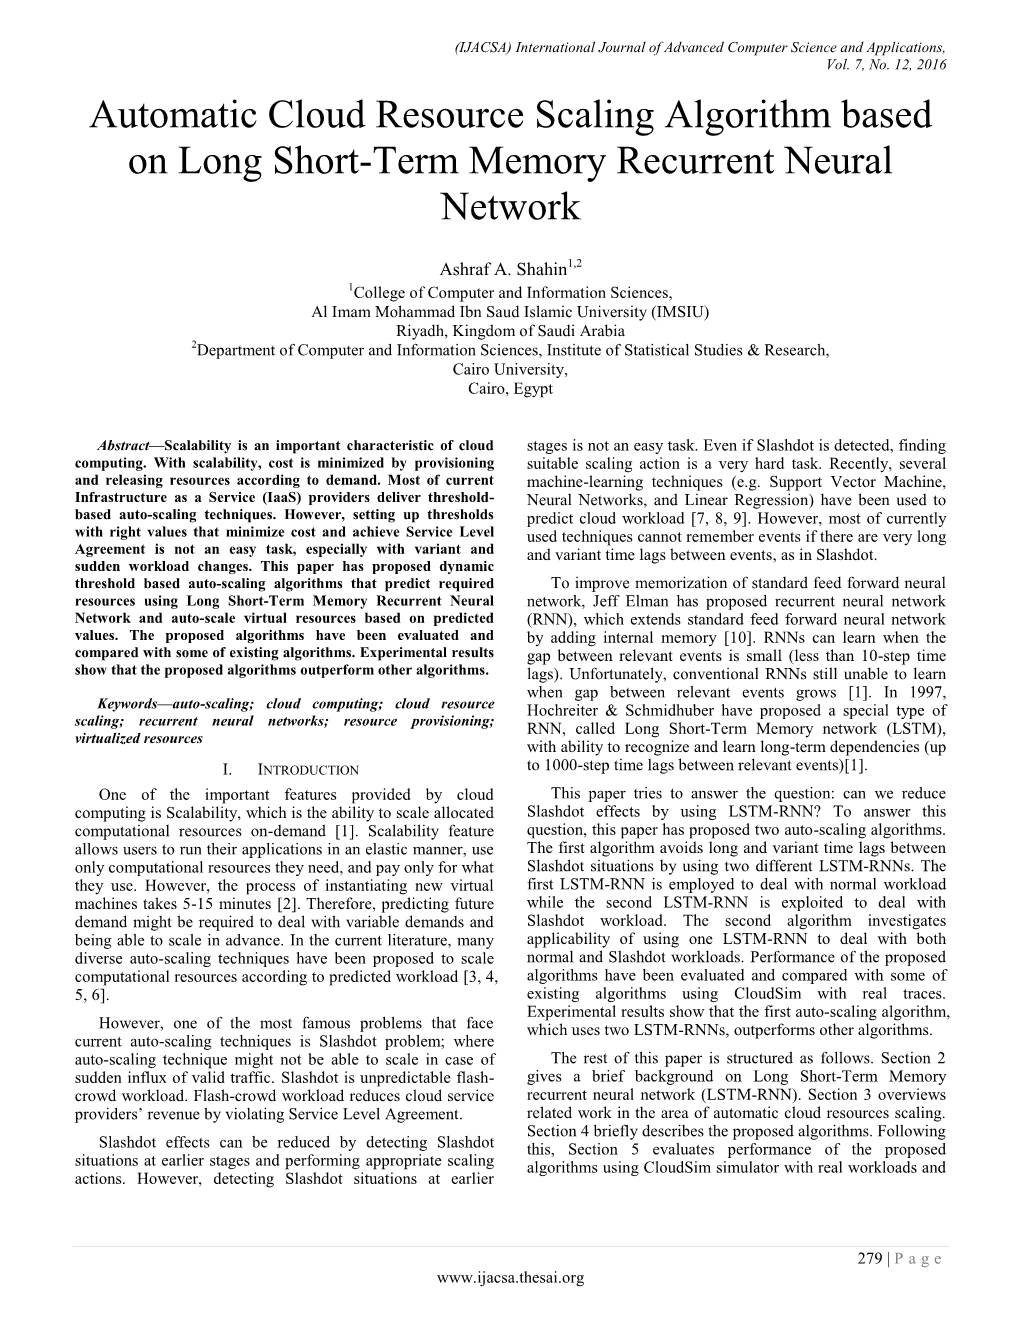 Automatic Cloud Resource Scaling Algorithm Based on Long Short-Term Memory Recurrent Neural Network